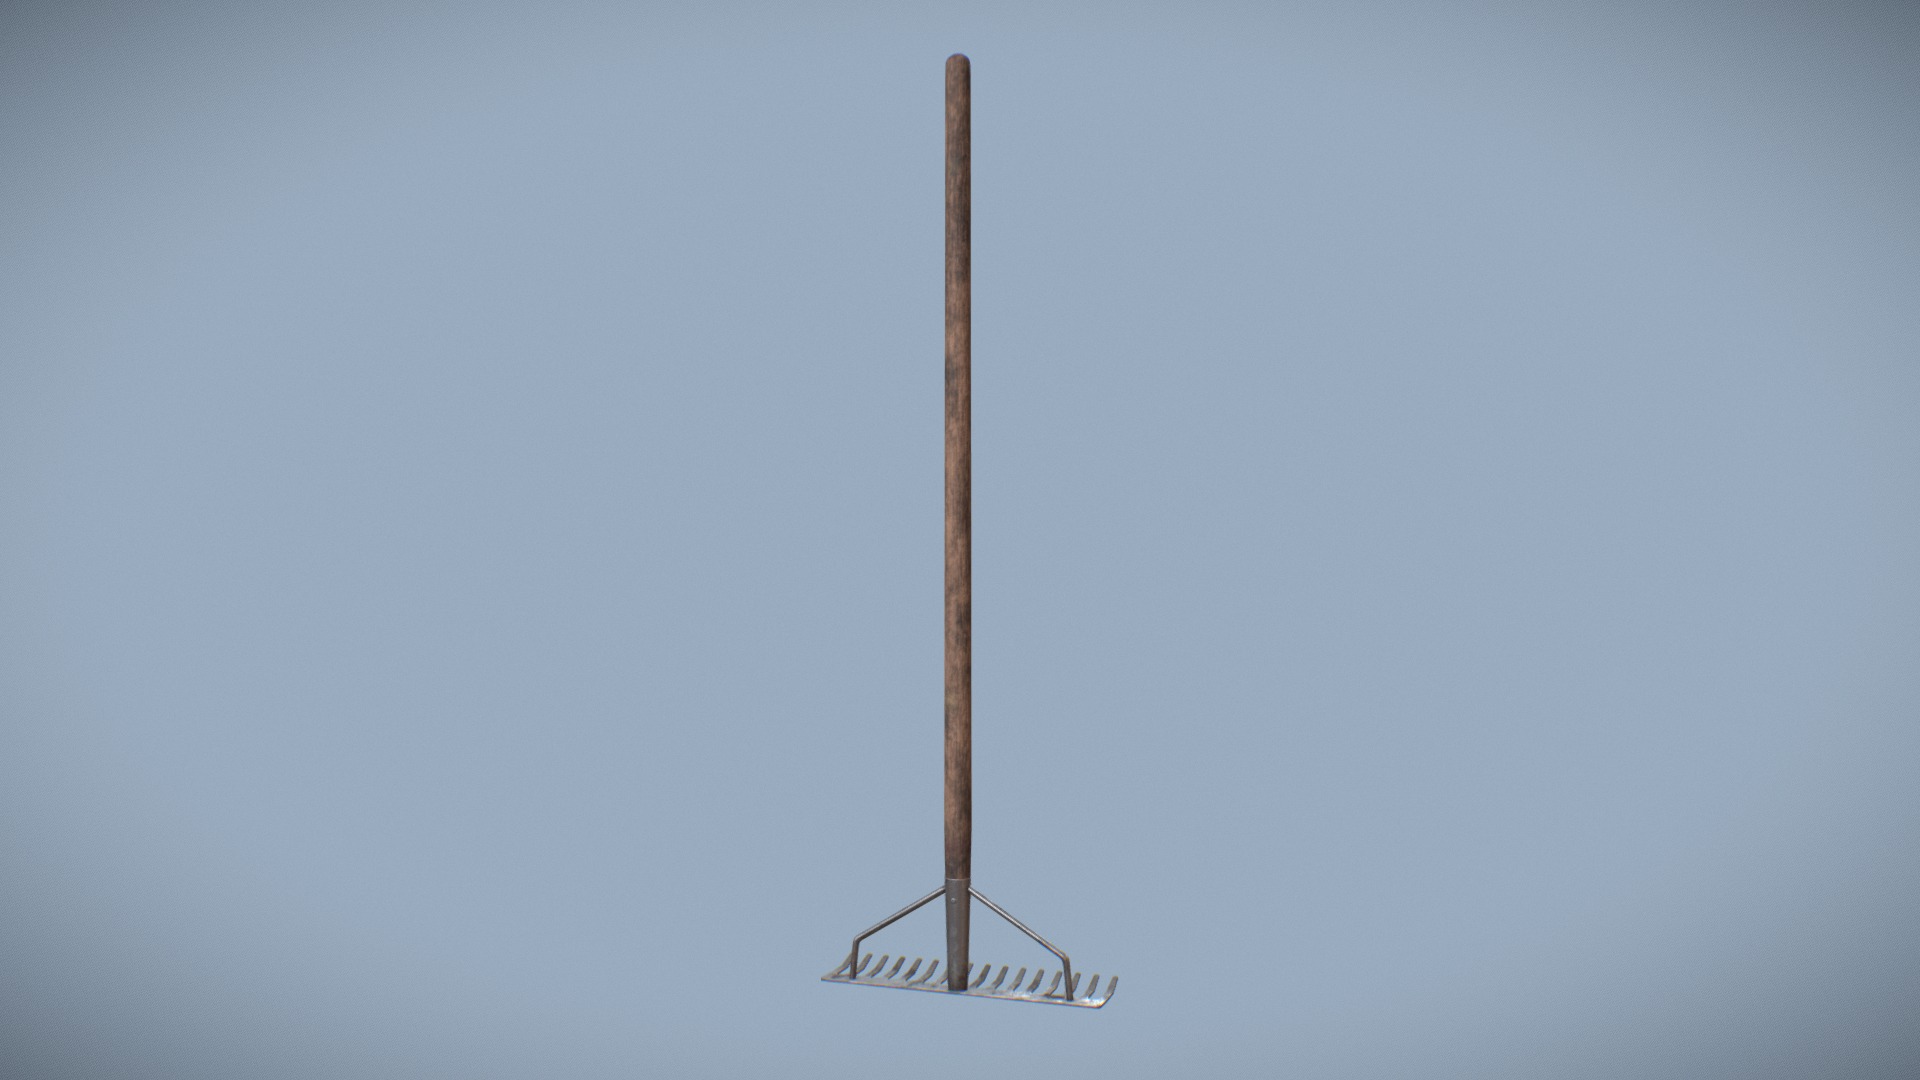 3D model Low poly garden rake - This is a 3D model of the Low poly garden rake. The 3D model is about a wooden pole with a sign on it.